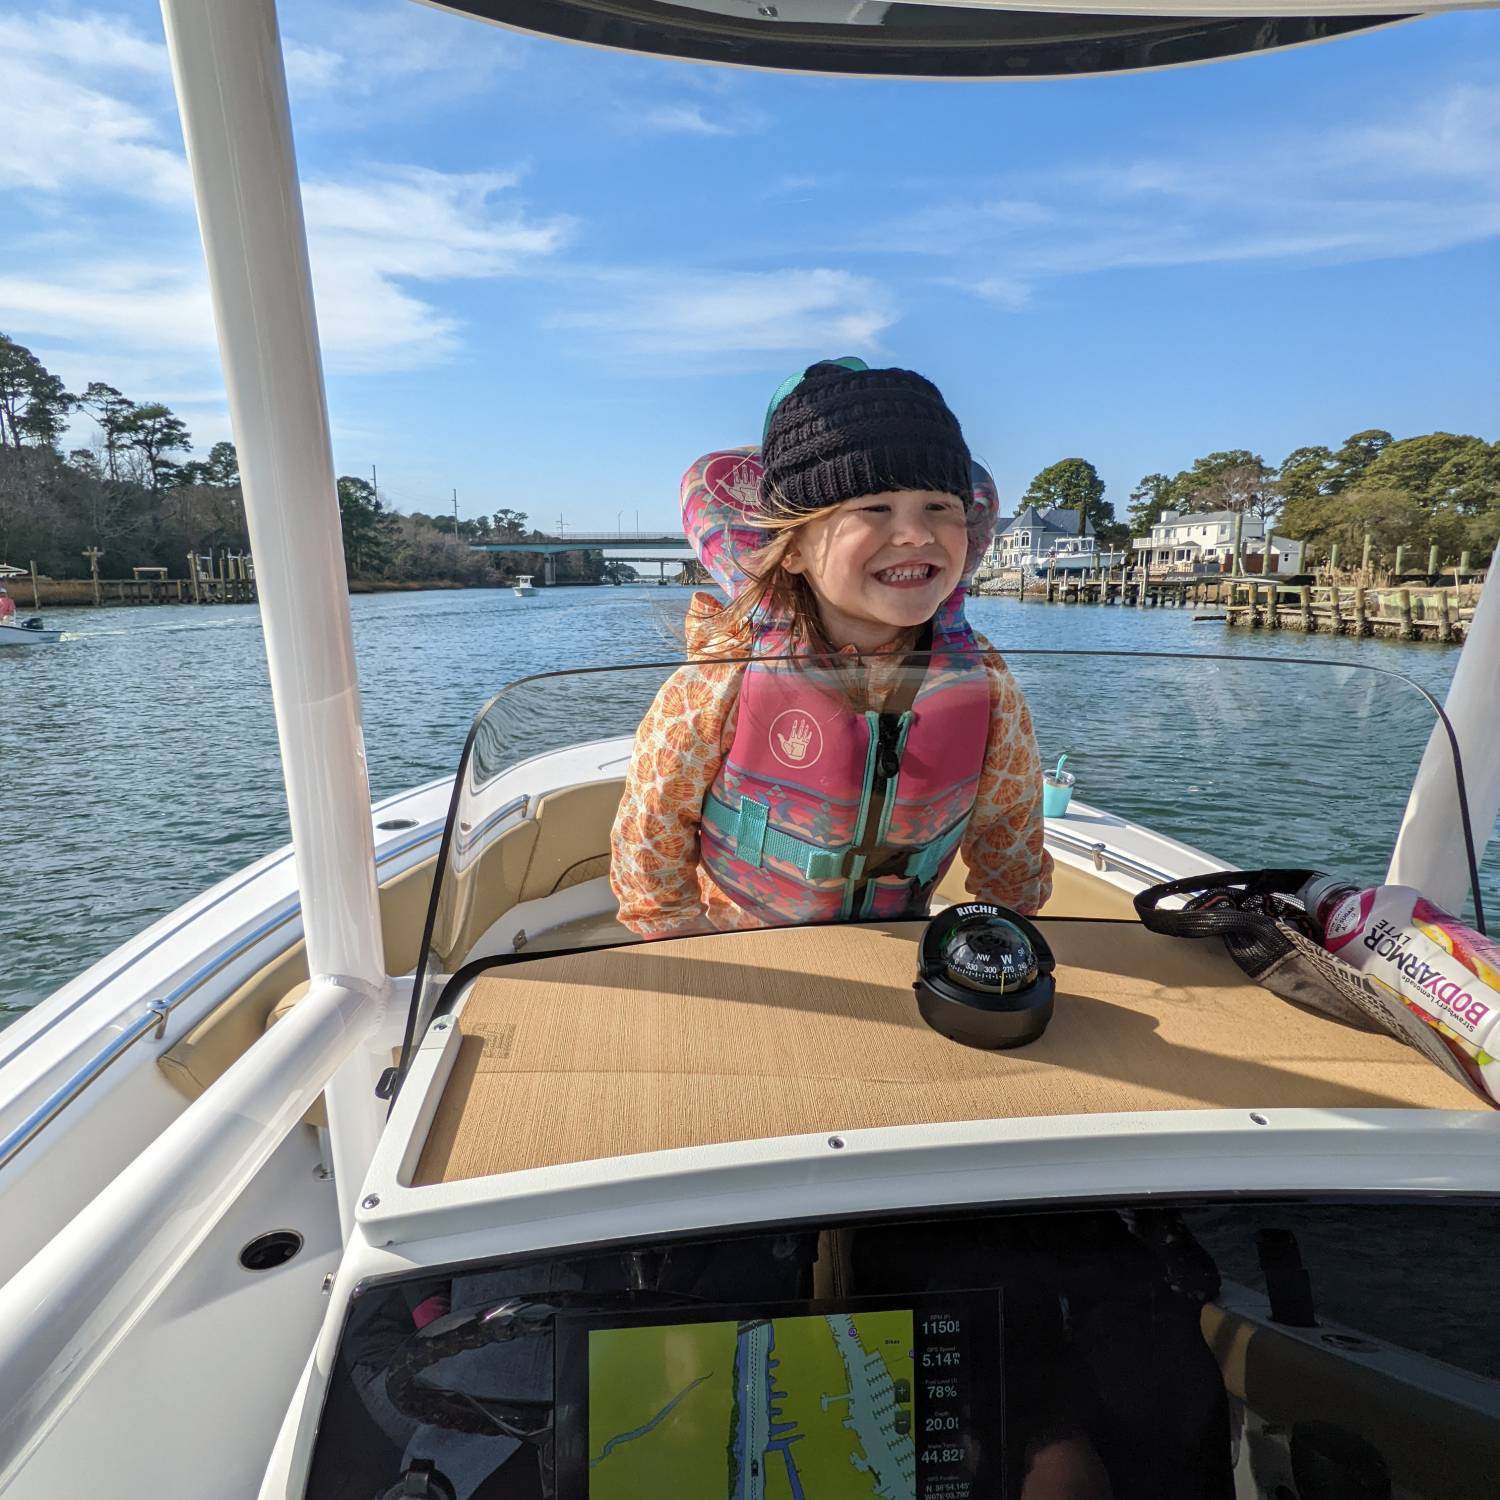 Title: Everyone, big and small, enjoying the Sportsman - On board their Sportsman Heritage 231 Center Console - Location: Virginia Beach VA. Participating in the Photo Contest #SportsmanMarch